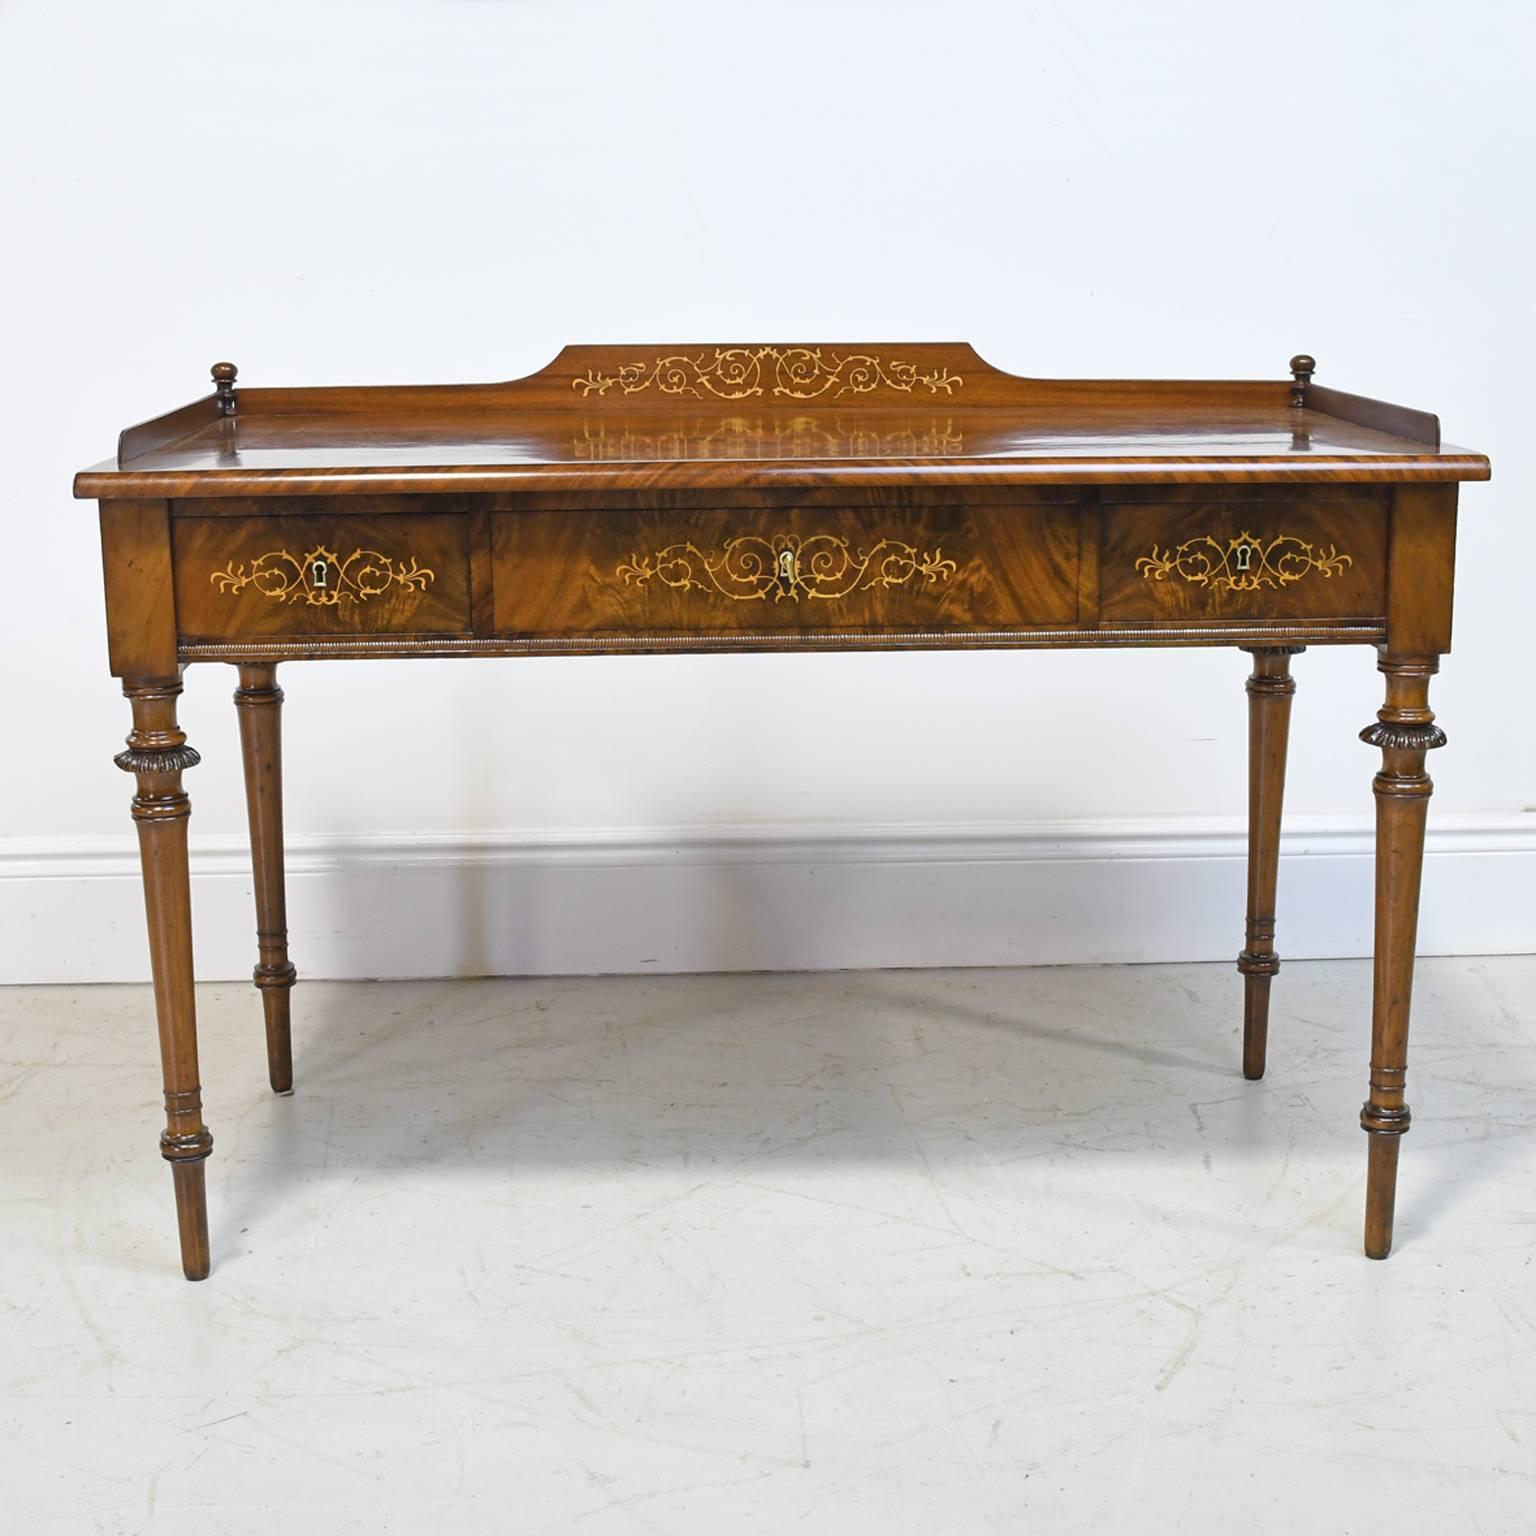 This exceptional writing table with three drawers is from the reign of Christian VIII of Denmark. The Cuban mahogany employed is of an extraordinary grade and the oxidation that has naturally occurred from exposure to light has left it with a